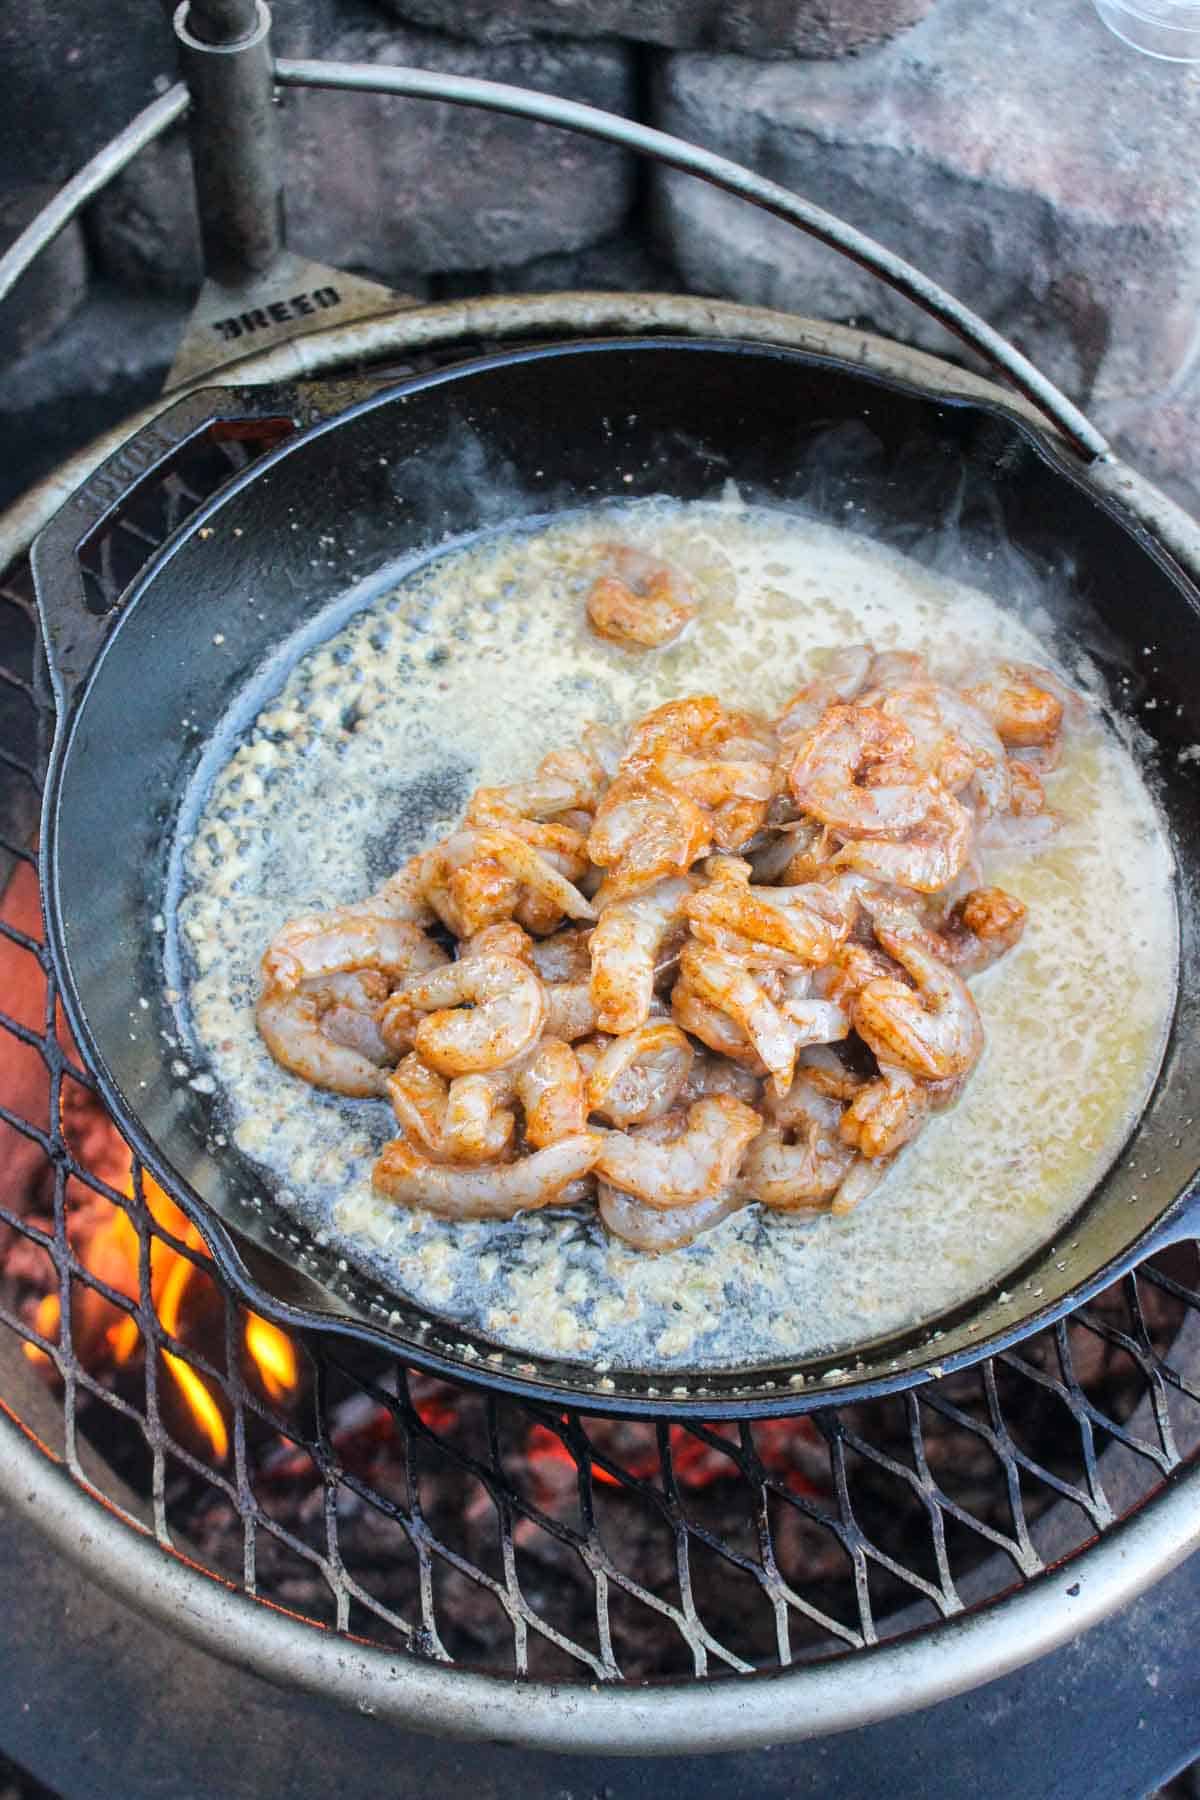 The shrimp cooking in the skillet with melted butter and minced garlic.